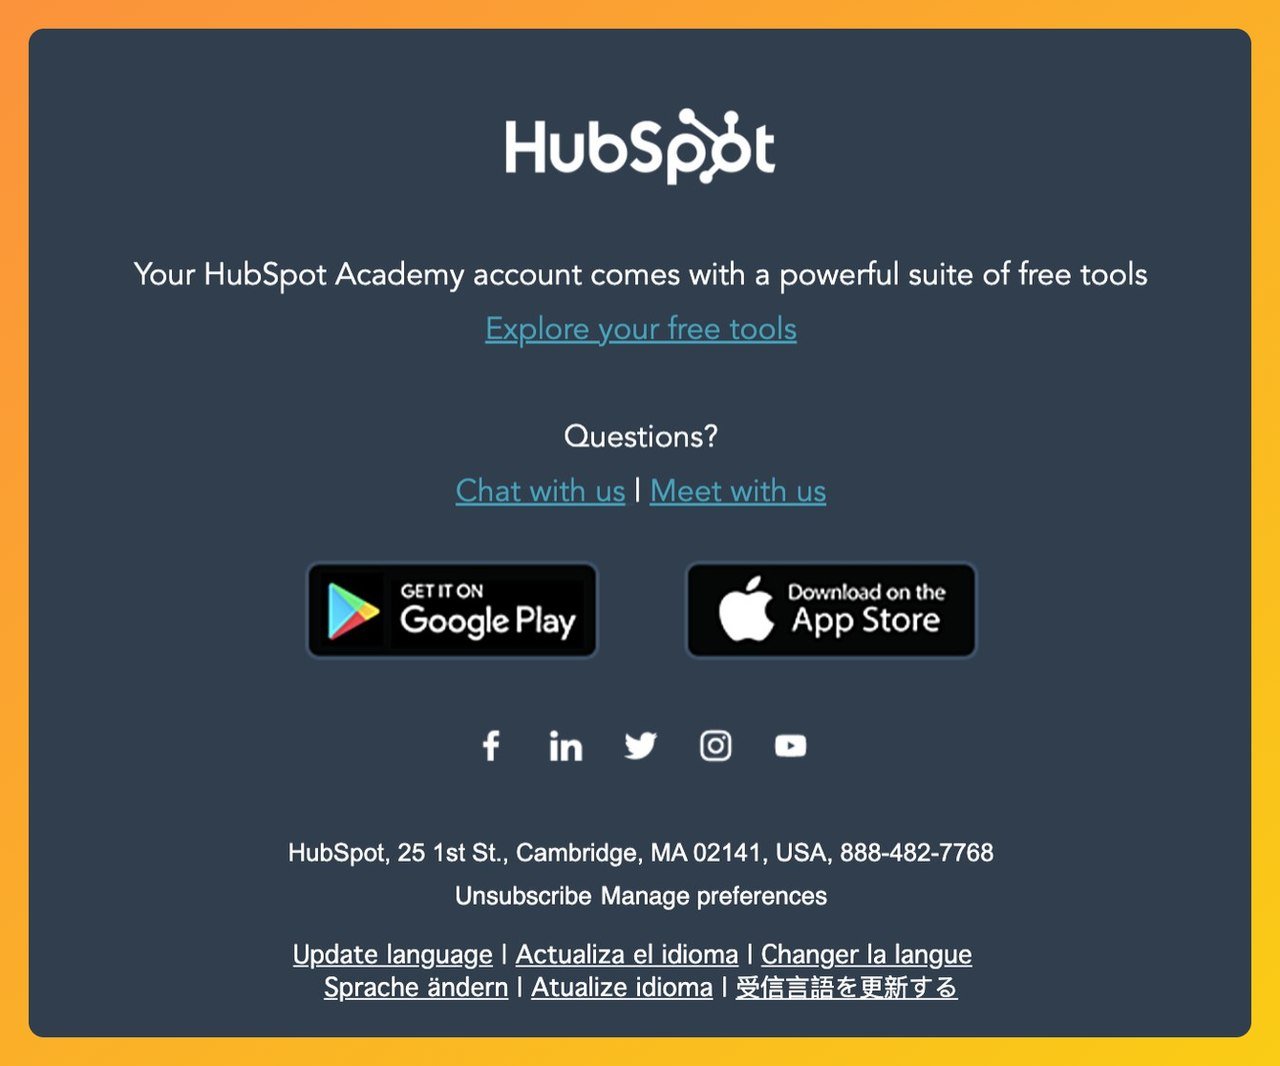 a screenshot of Hubspot email footer that shows the logo of the company, a call to action and legal information and links to download the app